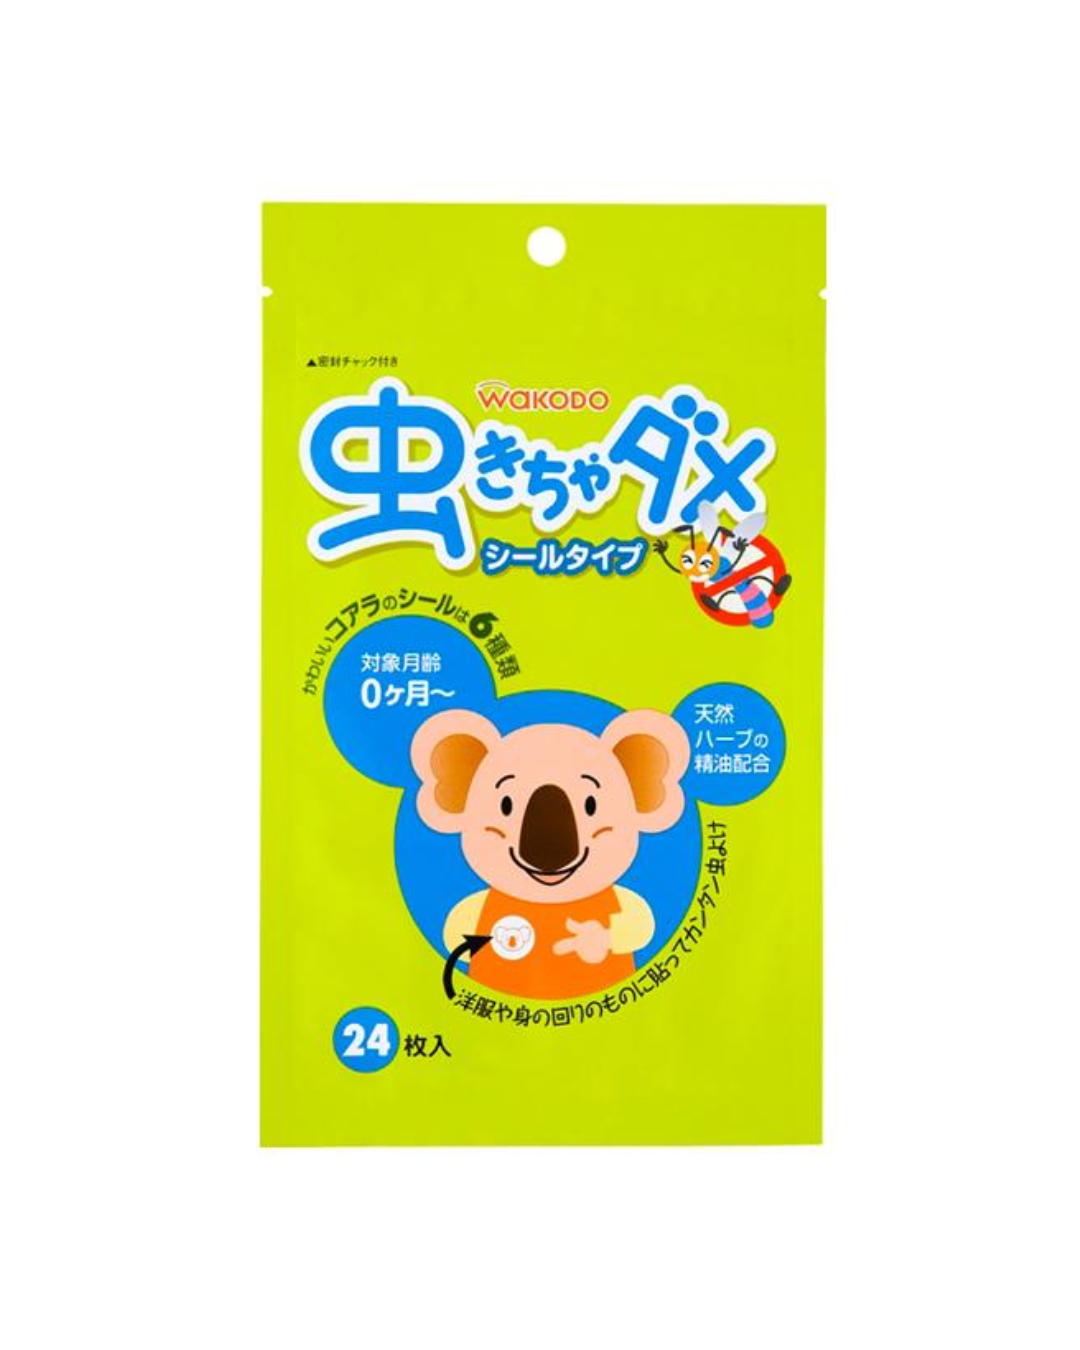 Wakado Natural Insect Repellant Patch